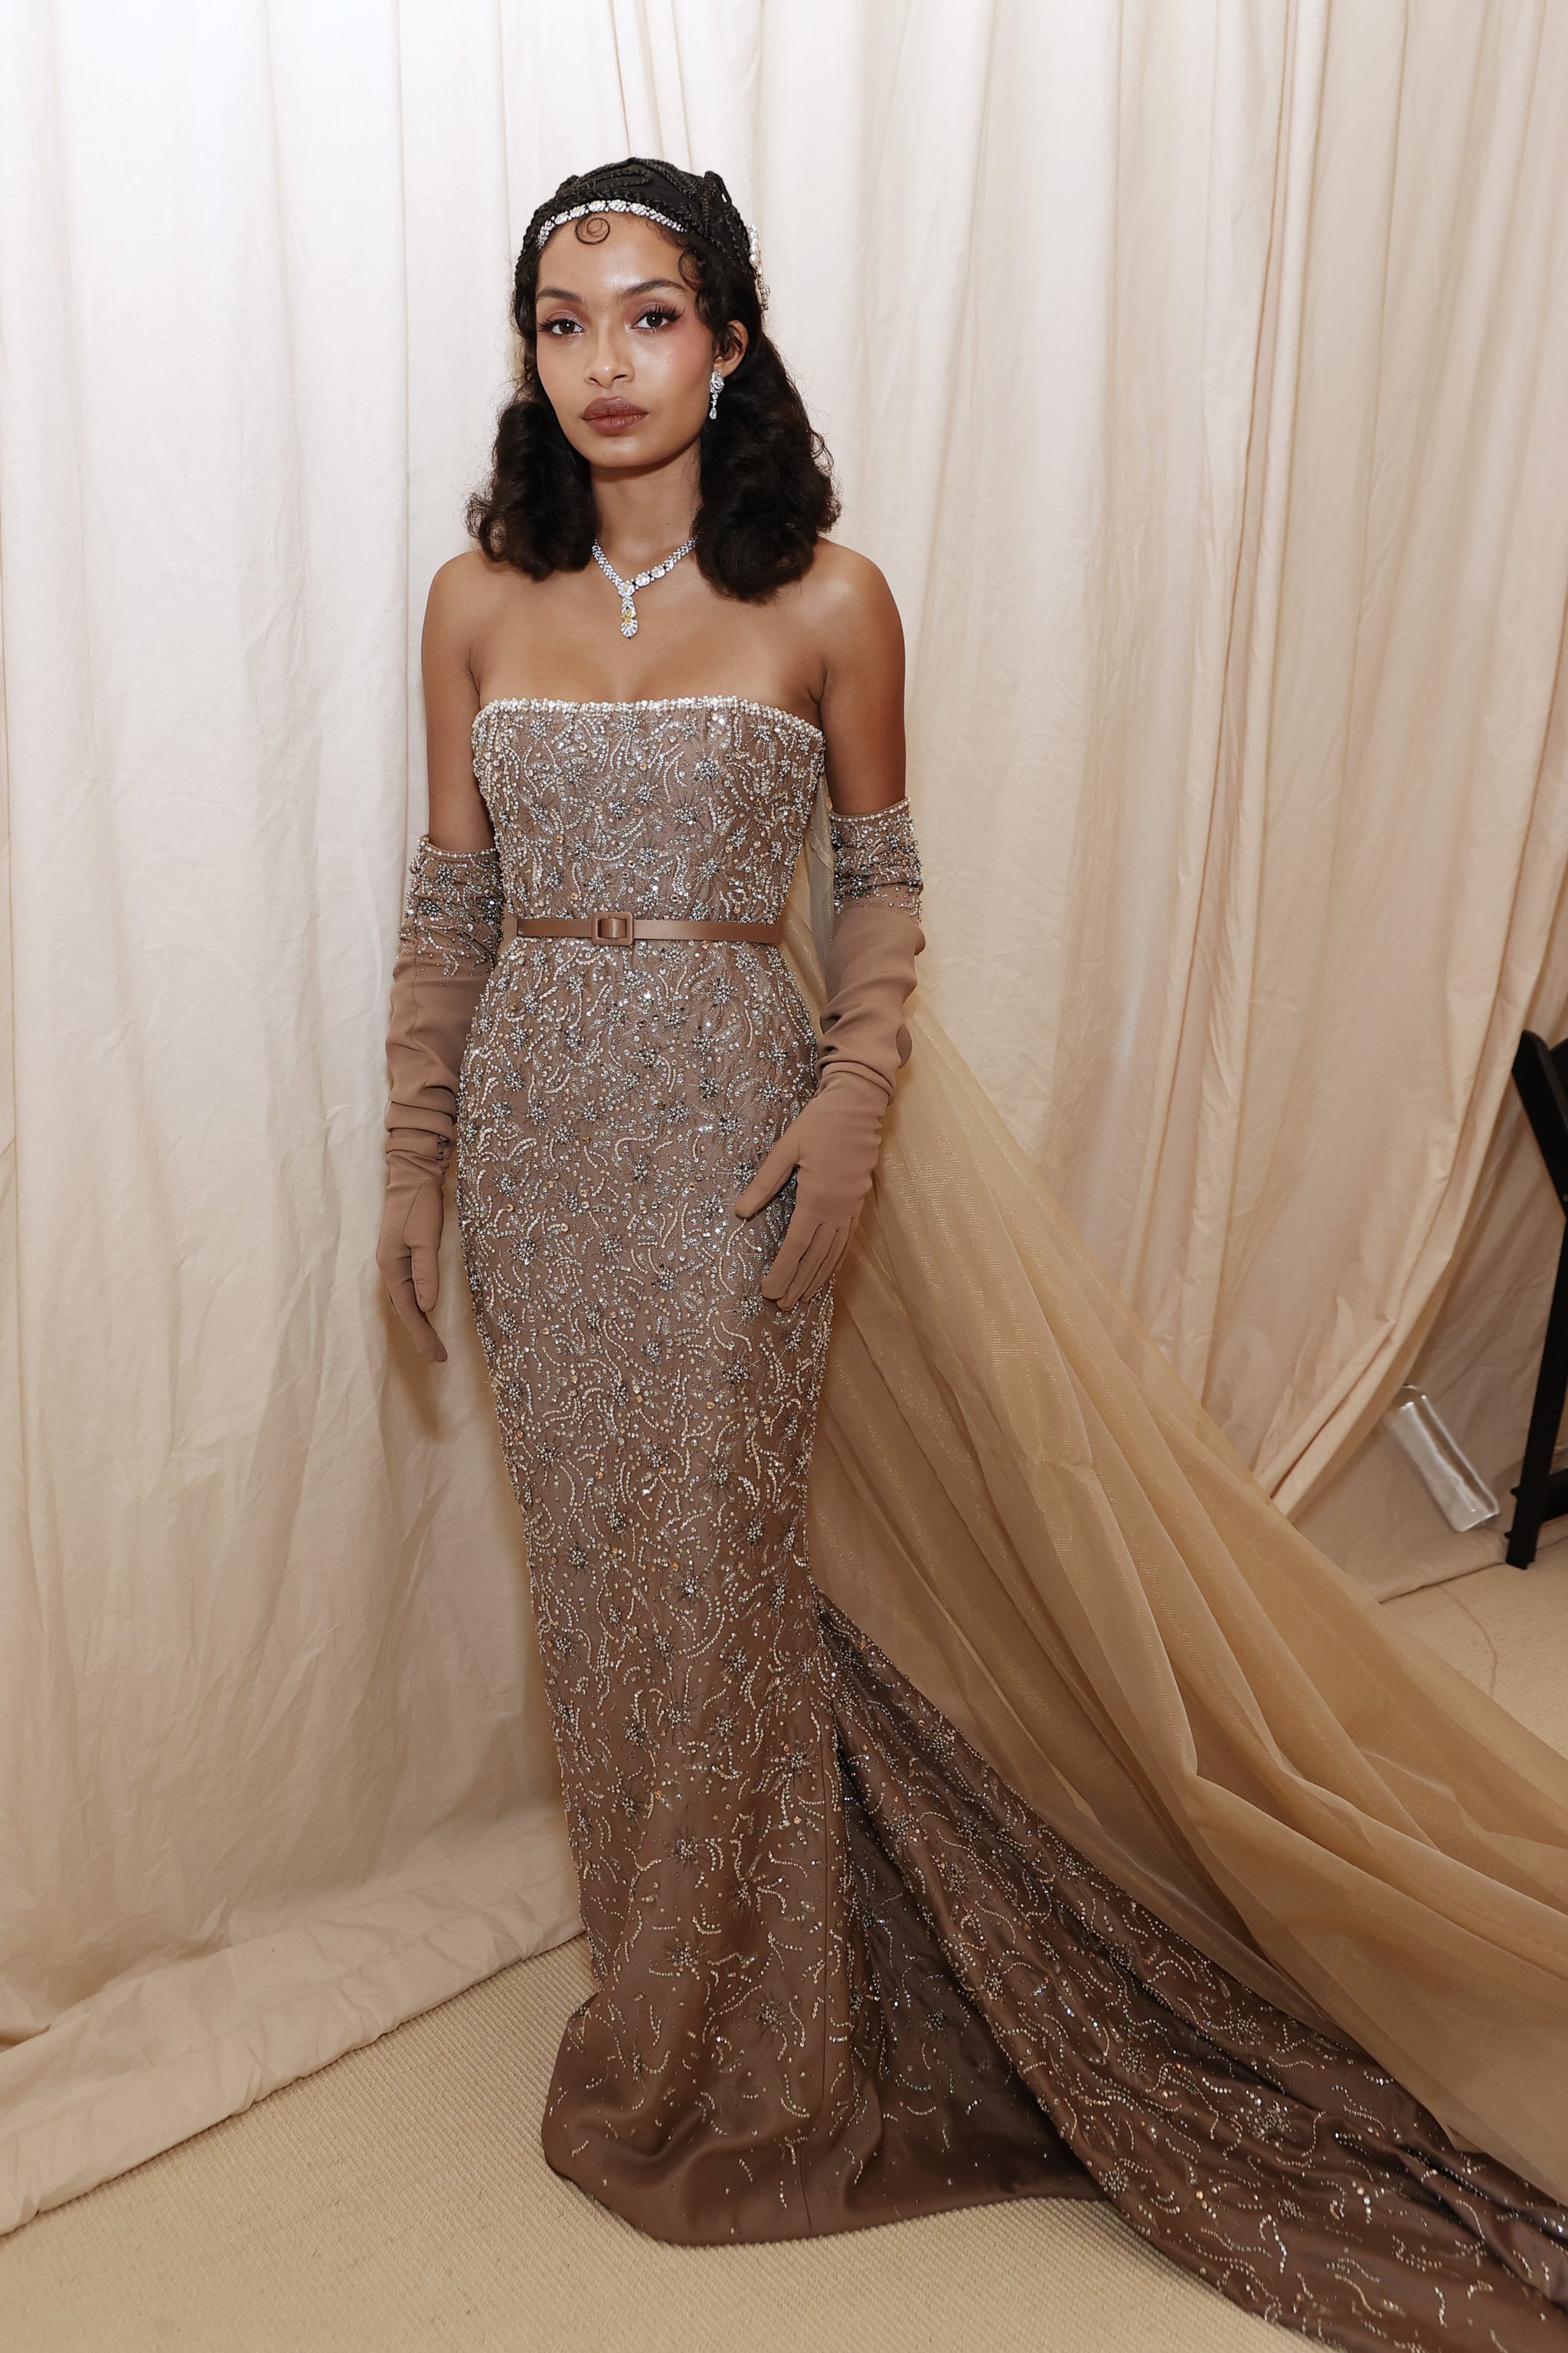 Give it up for @yarashahidi in @dior at the Met Gala